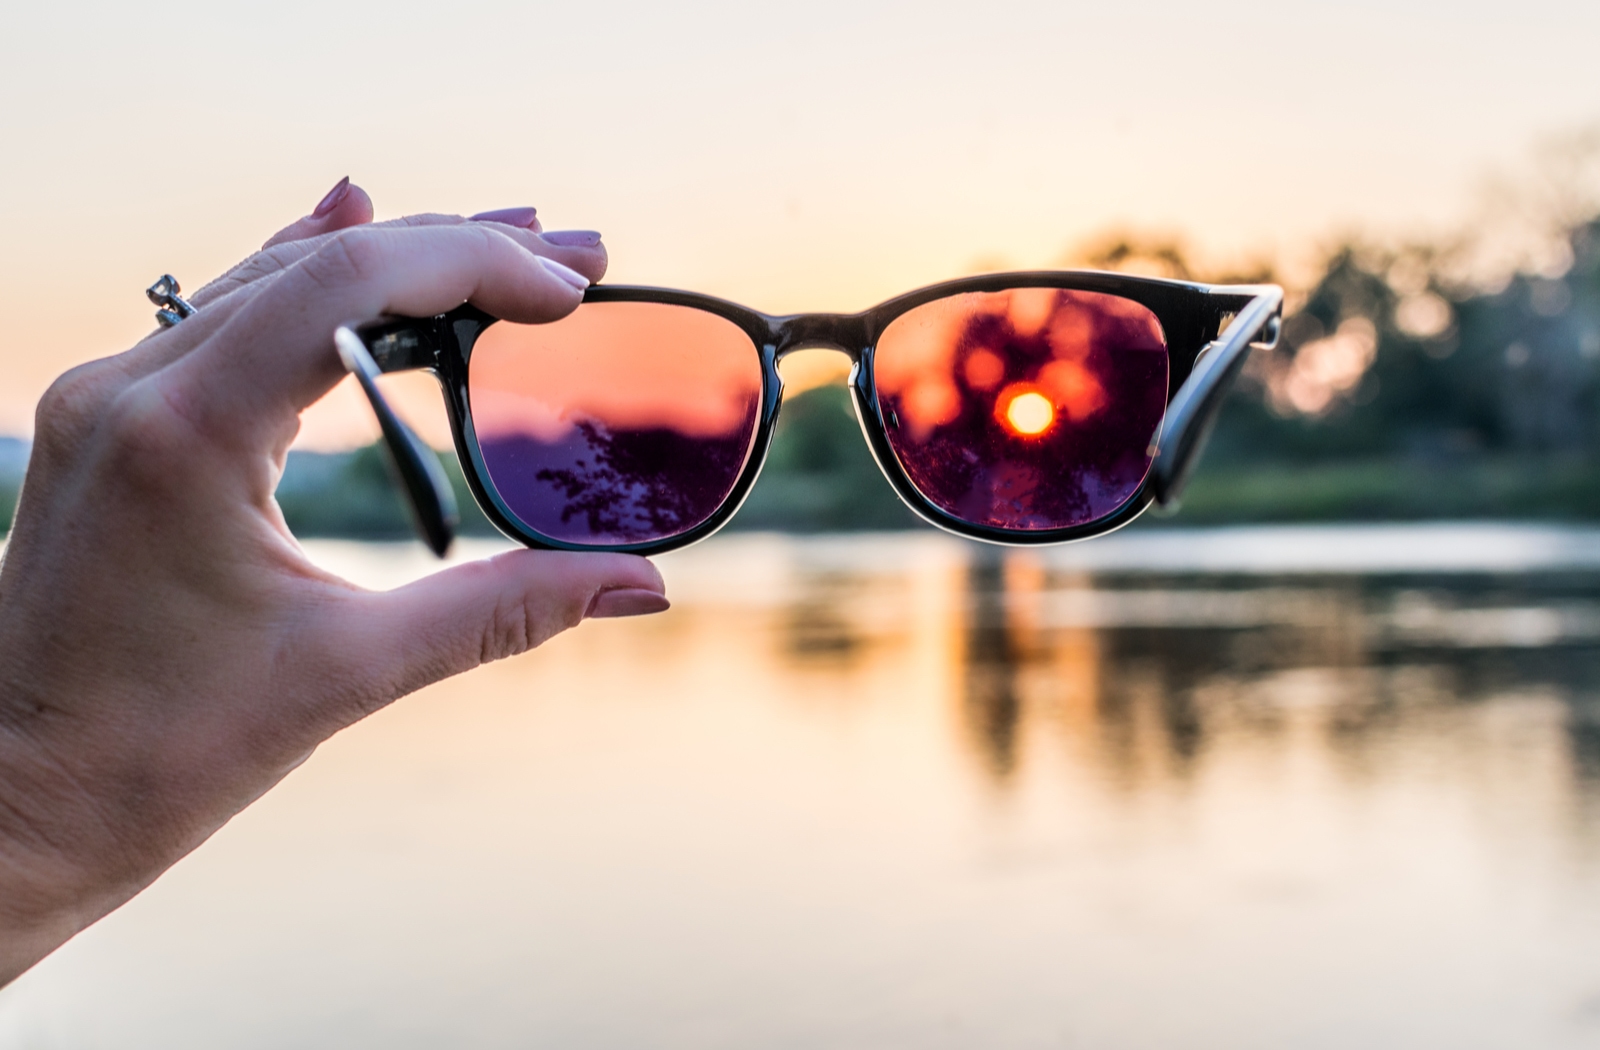 How To Clean Polarized Sunglasses